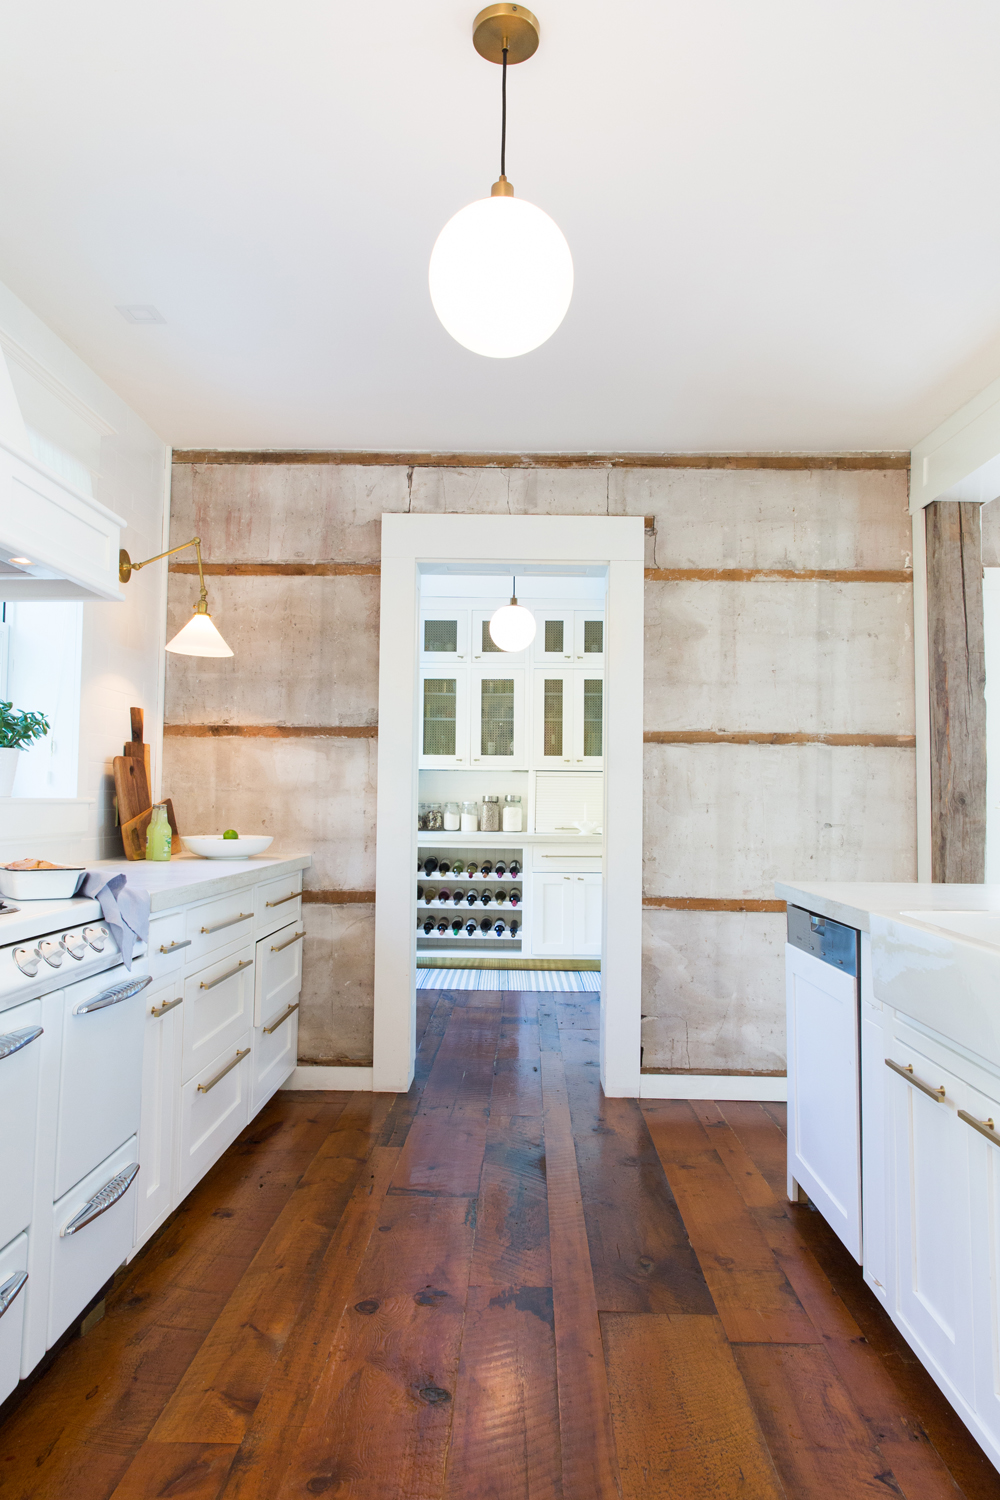 Original concrete and wood wall in kitchen